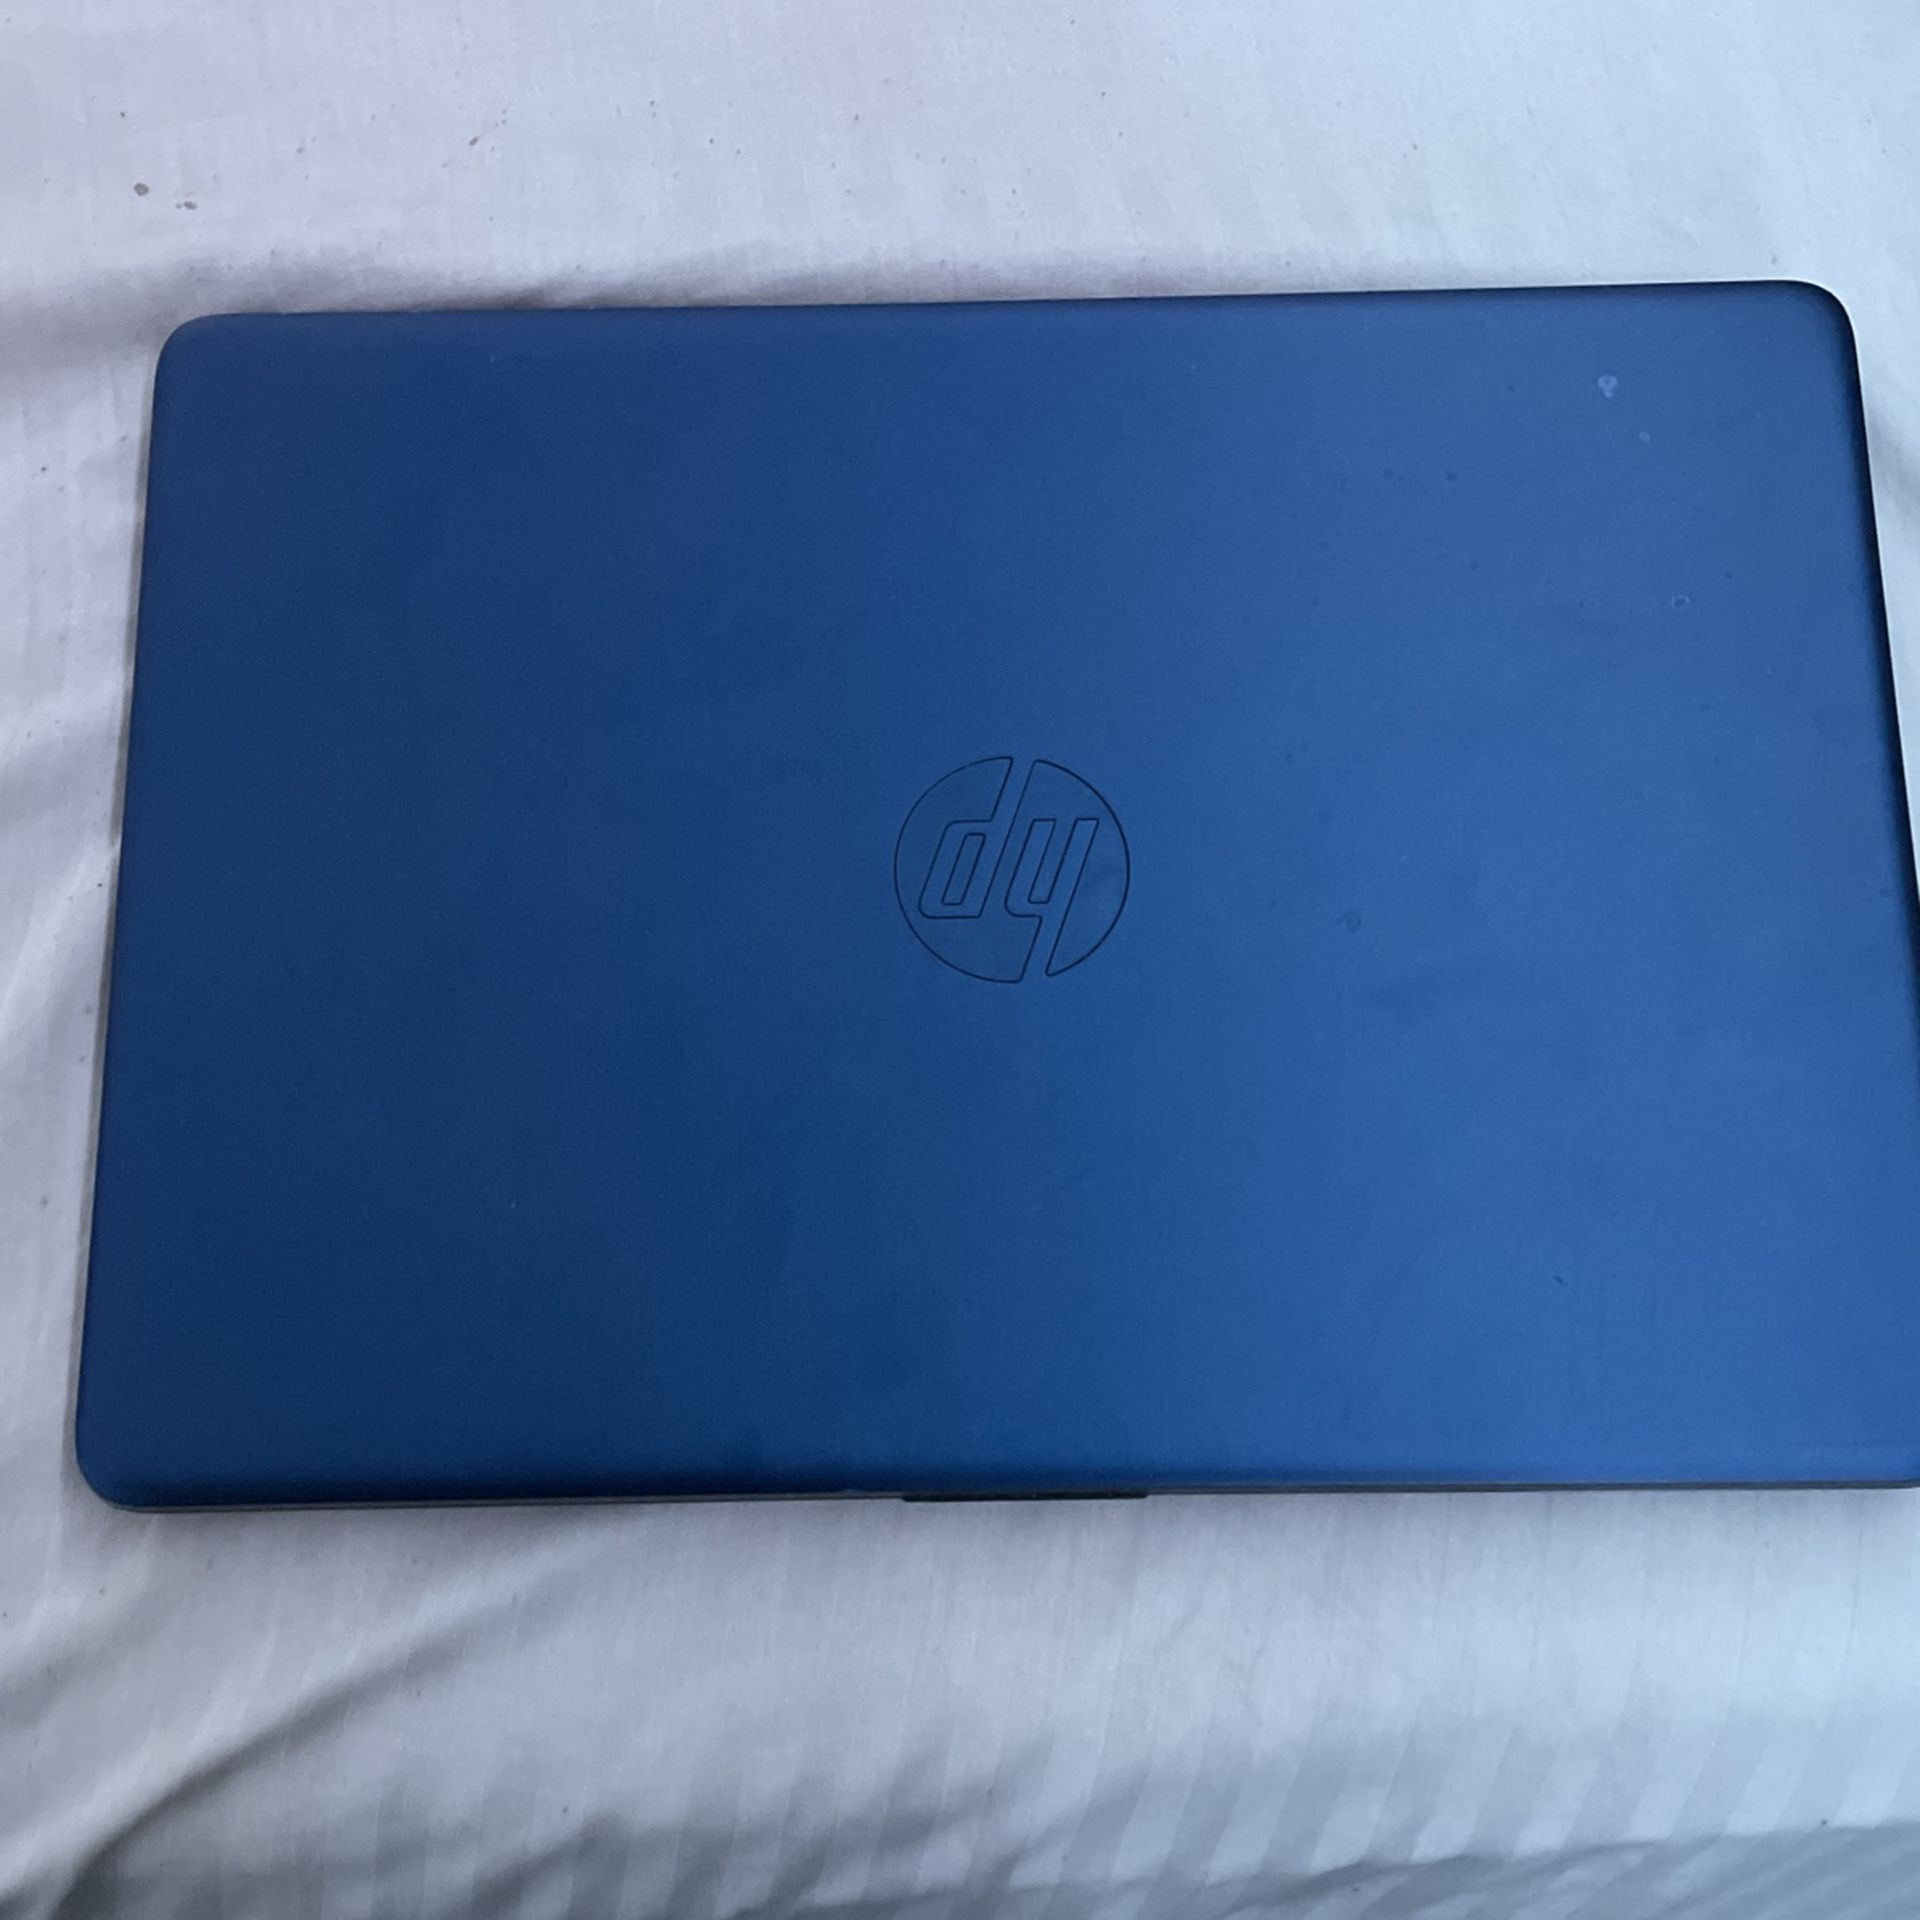 HP LAPTOP FULLY FUNCTIONAL, WILLING TO TALK PRICE